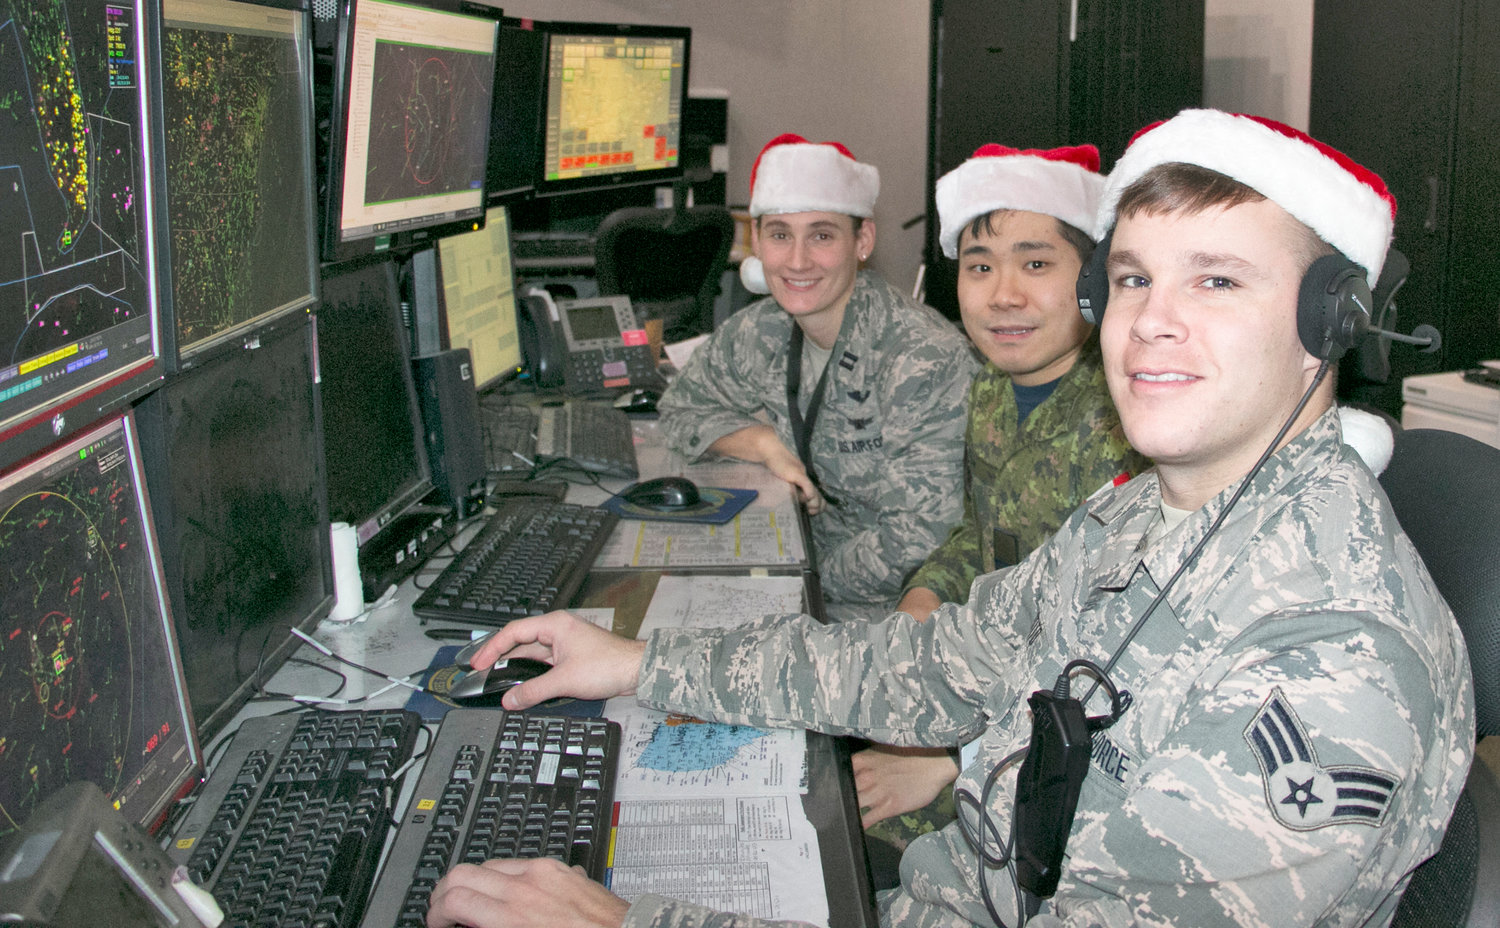 ON THE SANTA WATCH — Airmen at the Eastern Air Defense Sector recently conductedtraining in preparation for tracking Santa’s Christmas Eve flight. From front to back: Senior Airman Timothy Destito, New York Air National Guard; Capt. John Byeon, Royal Canadian Air Force, and Capt. Sarah Atherton, New York Air National Guard. Capt. Atherton and Senior Airman Destito are members of the 224th Air Defense Squadron while Capt. Byeon is a member of the Canadian detachment at EADS. For more information on NORAD’s Christmas Eve Santa tracking operations, visit noradsanta.org.